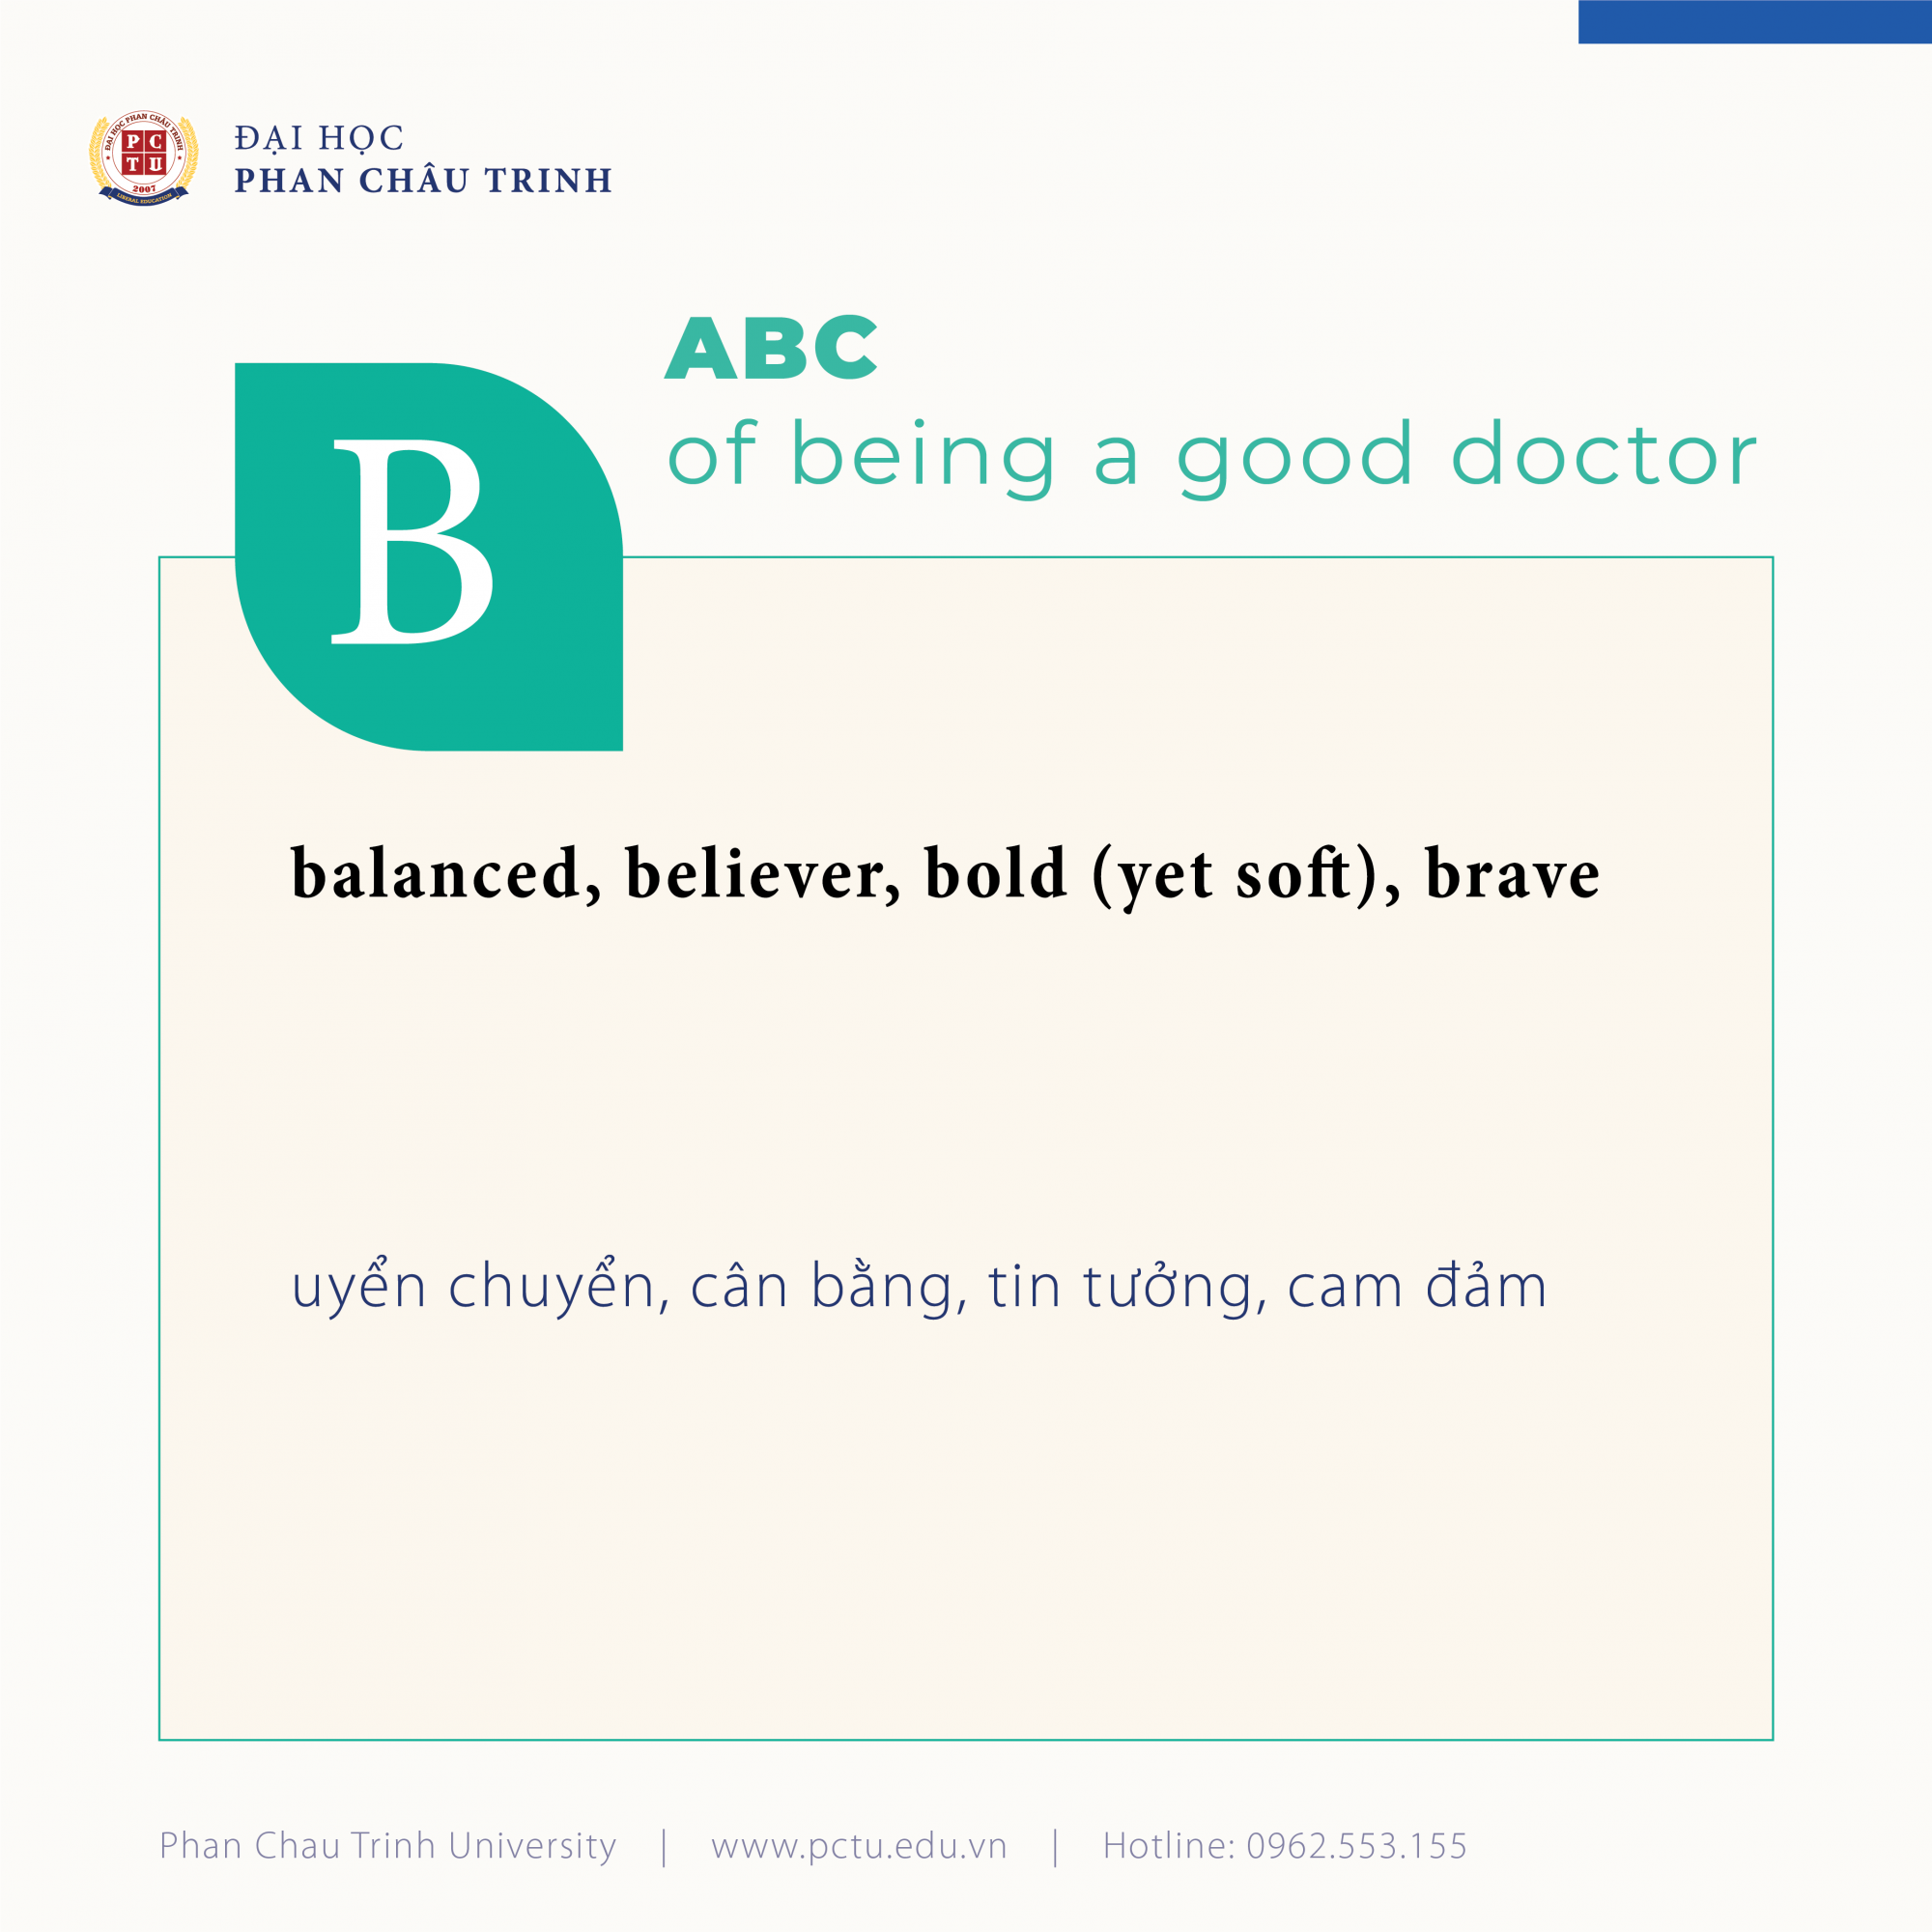 ABC_of_being_a_good_doctor-02